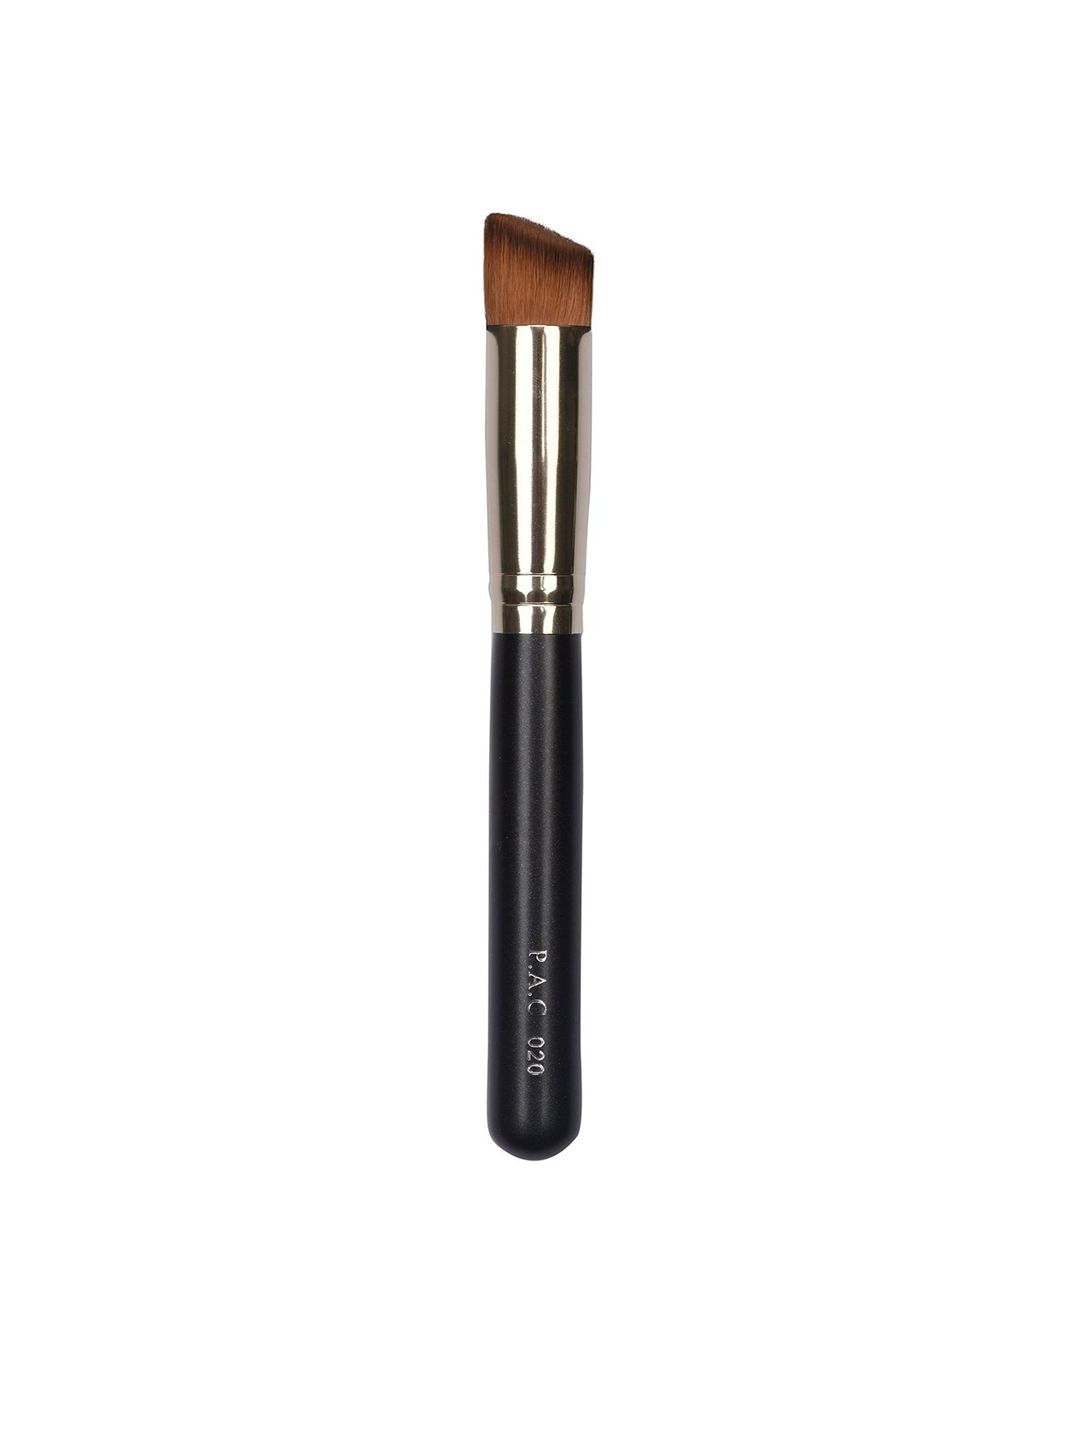 PAC Black & Brown Foundation Brush - 020 Price in India